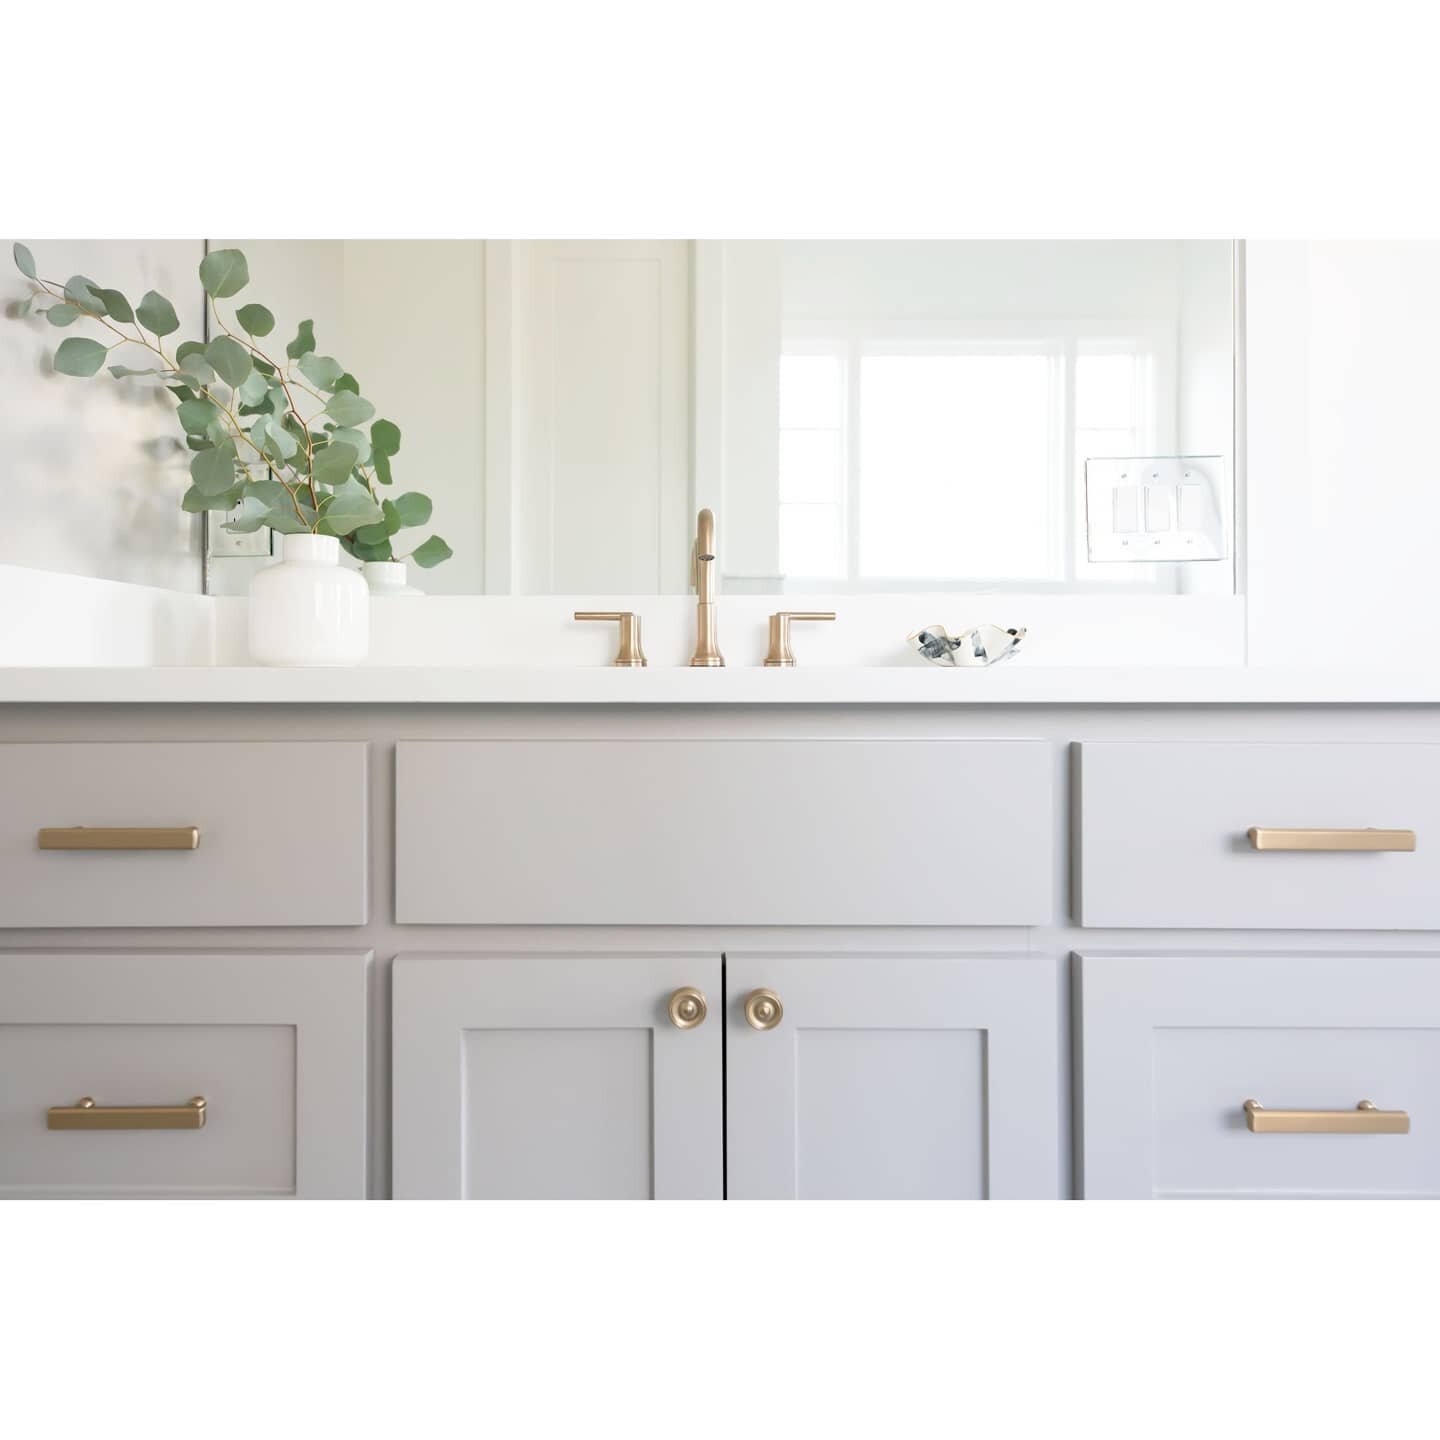 A morning of back to back cabinet meetings and I am pumped! Kitchen and baths on repeat! 🤎🤎

Photo @rubyandpeachphoto 
Design @andriafromminteriors 
Builder @mch_constructionoftn